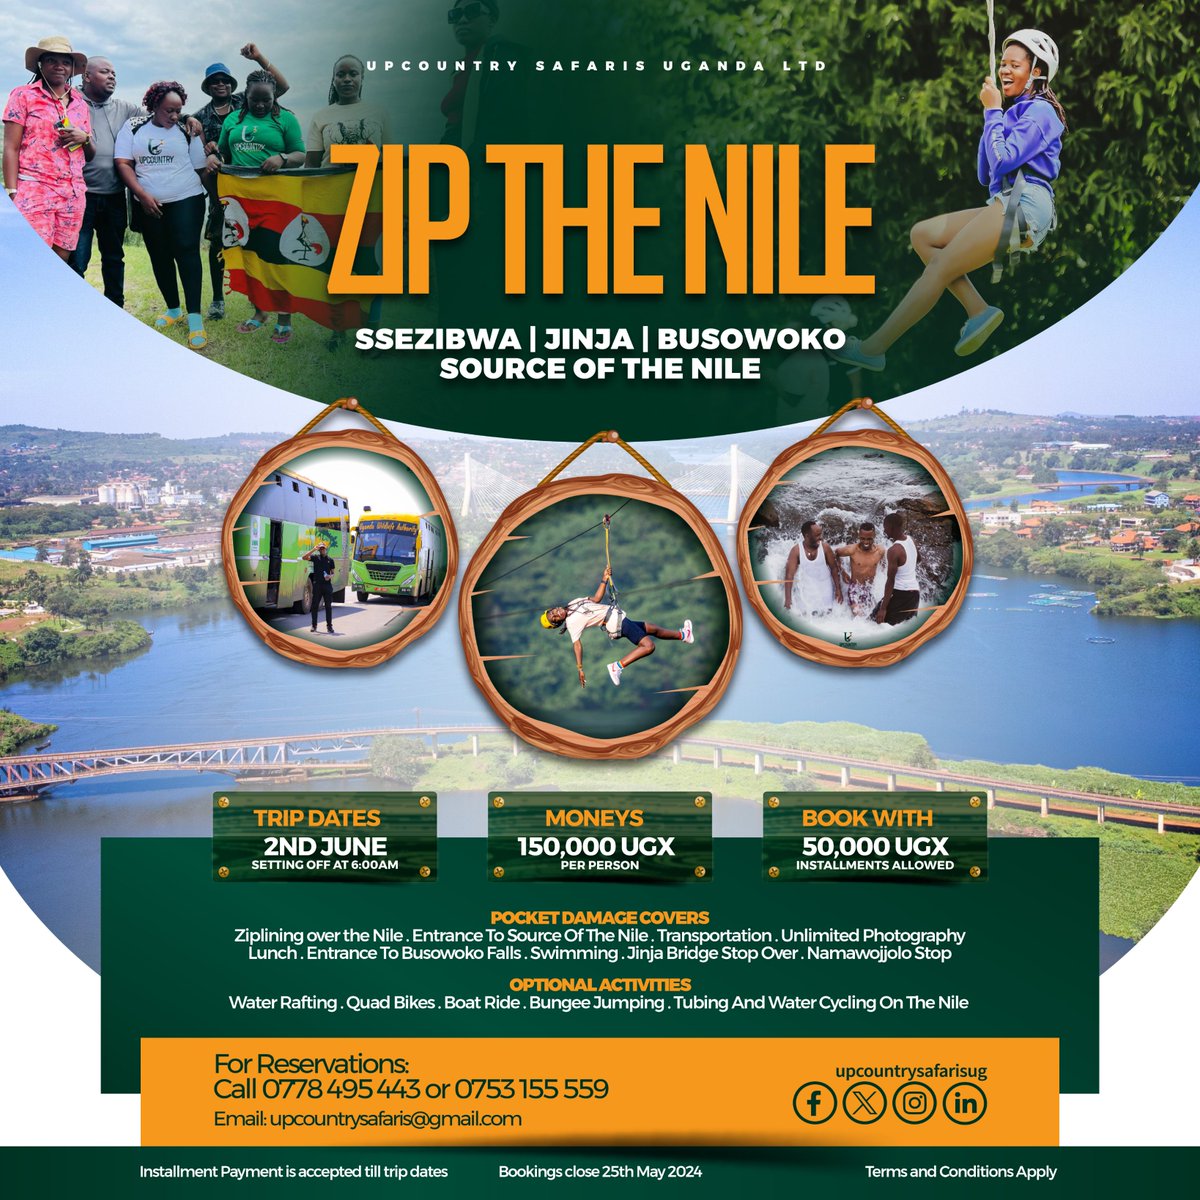 Embark on an unforgettable adventure down the Nile with our #ZiptheNile Jinja trip! 🚣‍♂️ Experience the thrill of zip lining over the water and soak in the stunning views.

Limited spots available, book now for the ultimate adrenaline rush! #ZiptheNile #AdventureAwaits #BookNow